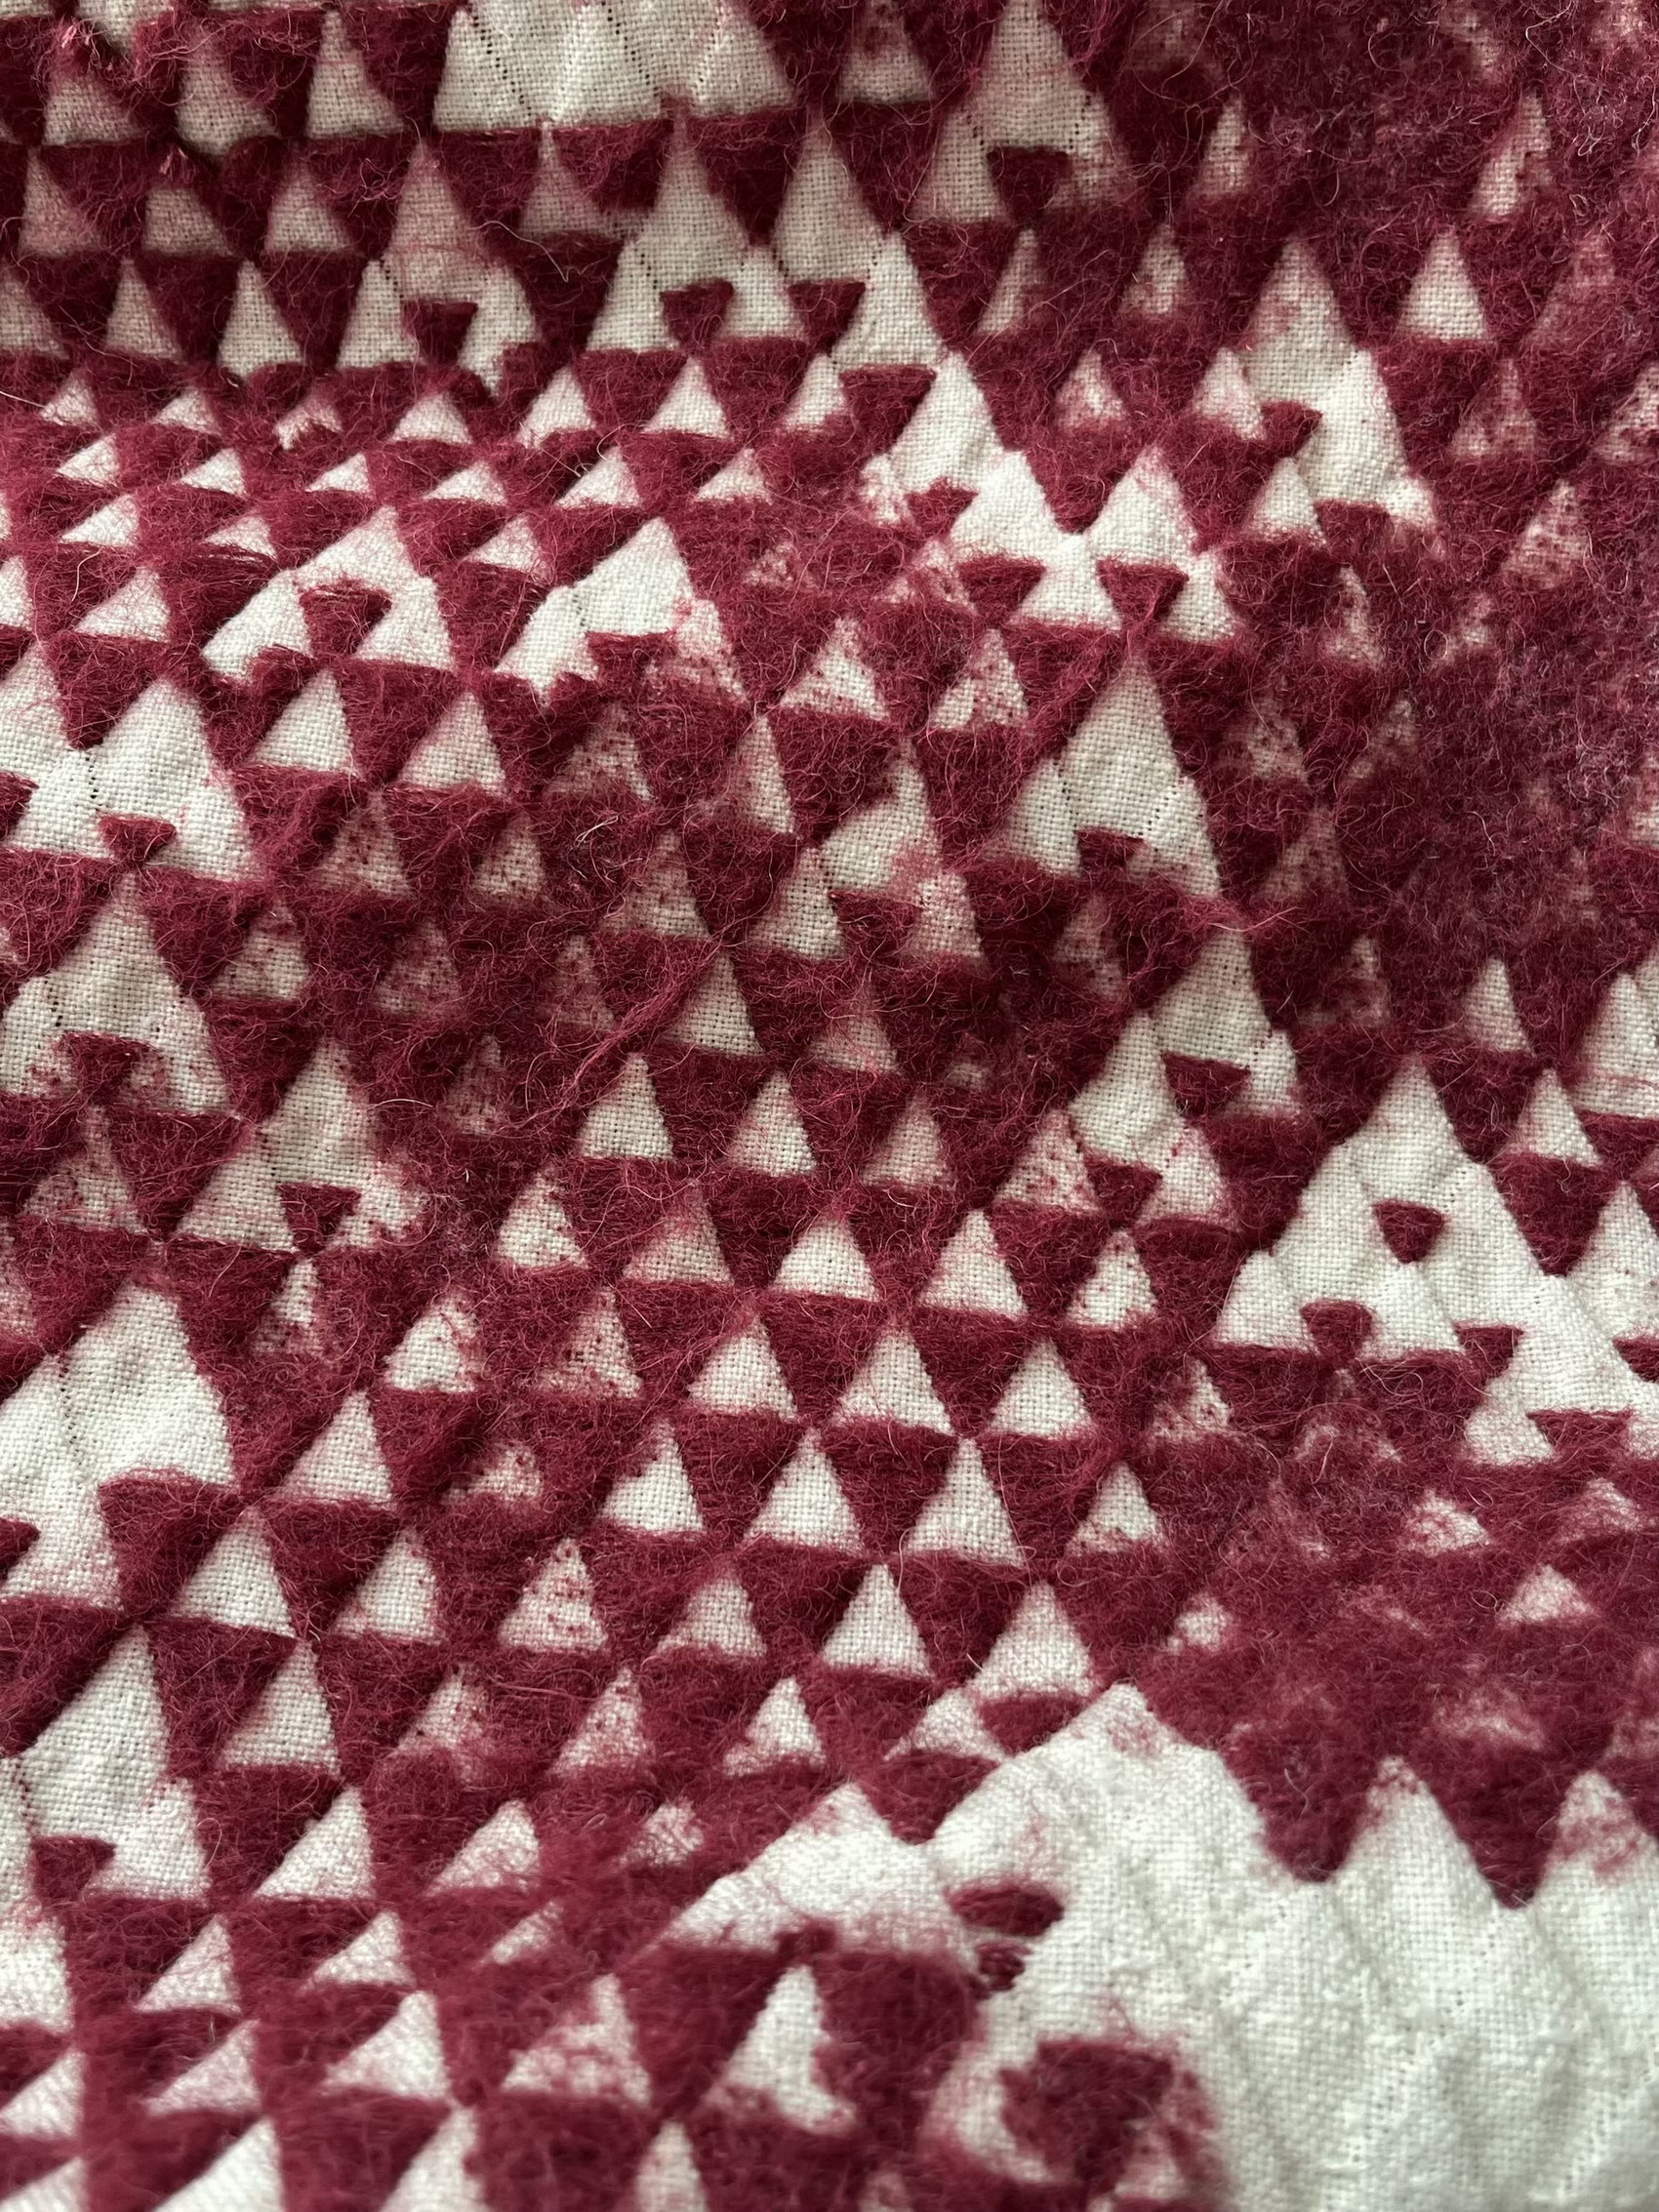 Textile sample: woven and damaged